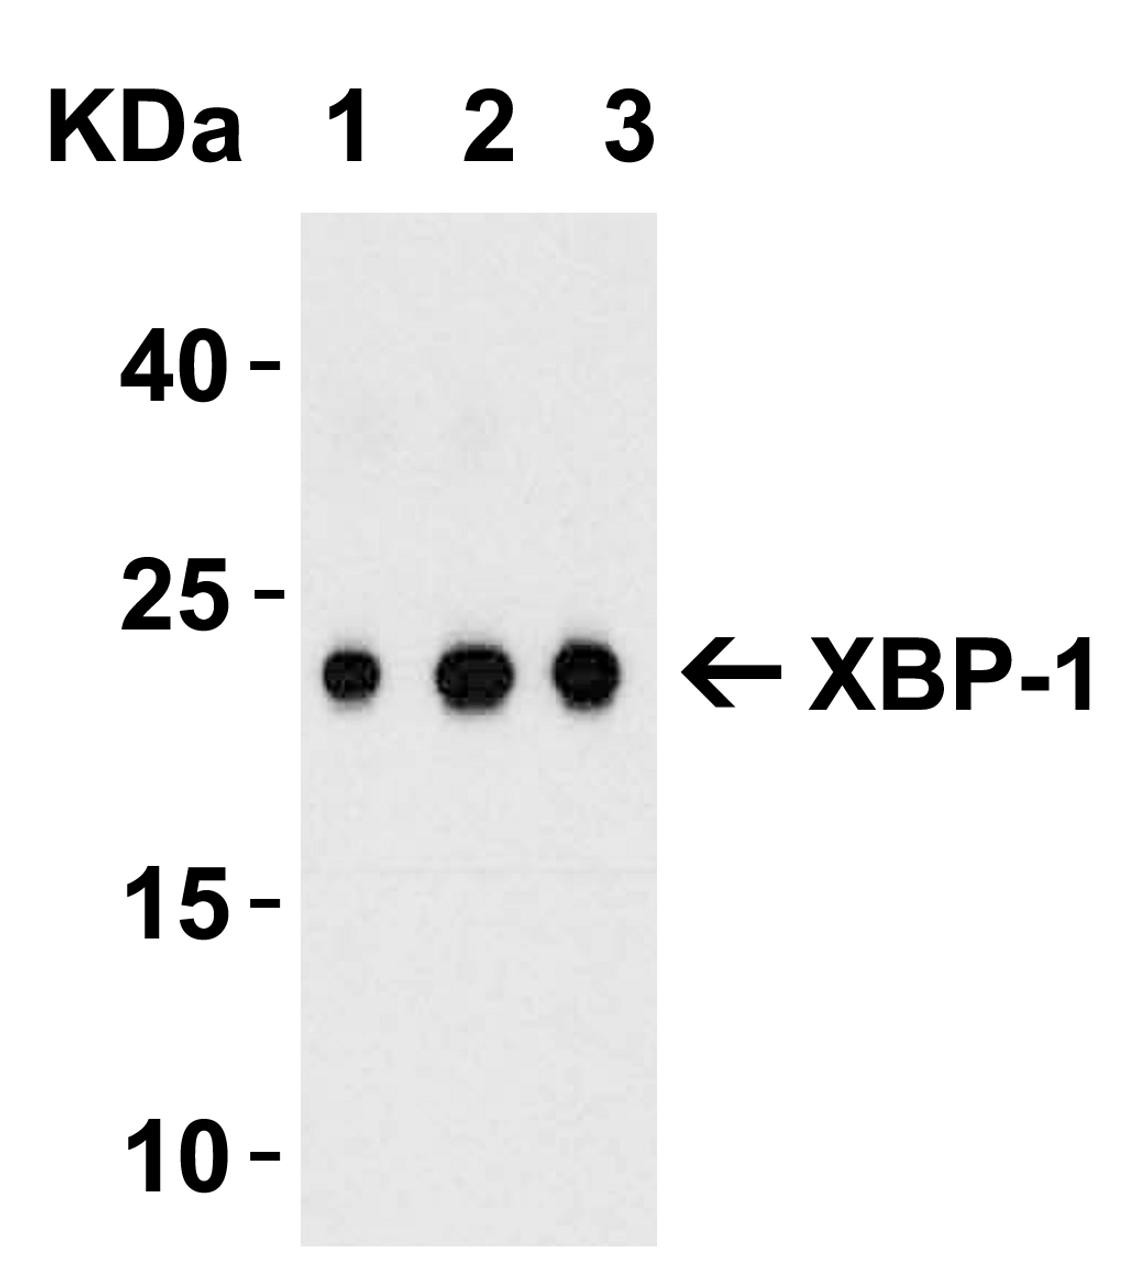 Figure 2 Western Blot Validation with Recombinant Protein
Loading: 100 ng of human XBP-1 recombinant protein per lane.
Antibodies: XBP-1 3687 (A: 0.5 ug/mL, B: 1 ug/mL and C: 2 ug/mL) , 1h incubation at RT in 5% NFDM/TBST.
Secondary: Goat anti-rabbit IgG HRP conjugate at 1:10000 dilution.
Observed at around 23kD.